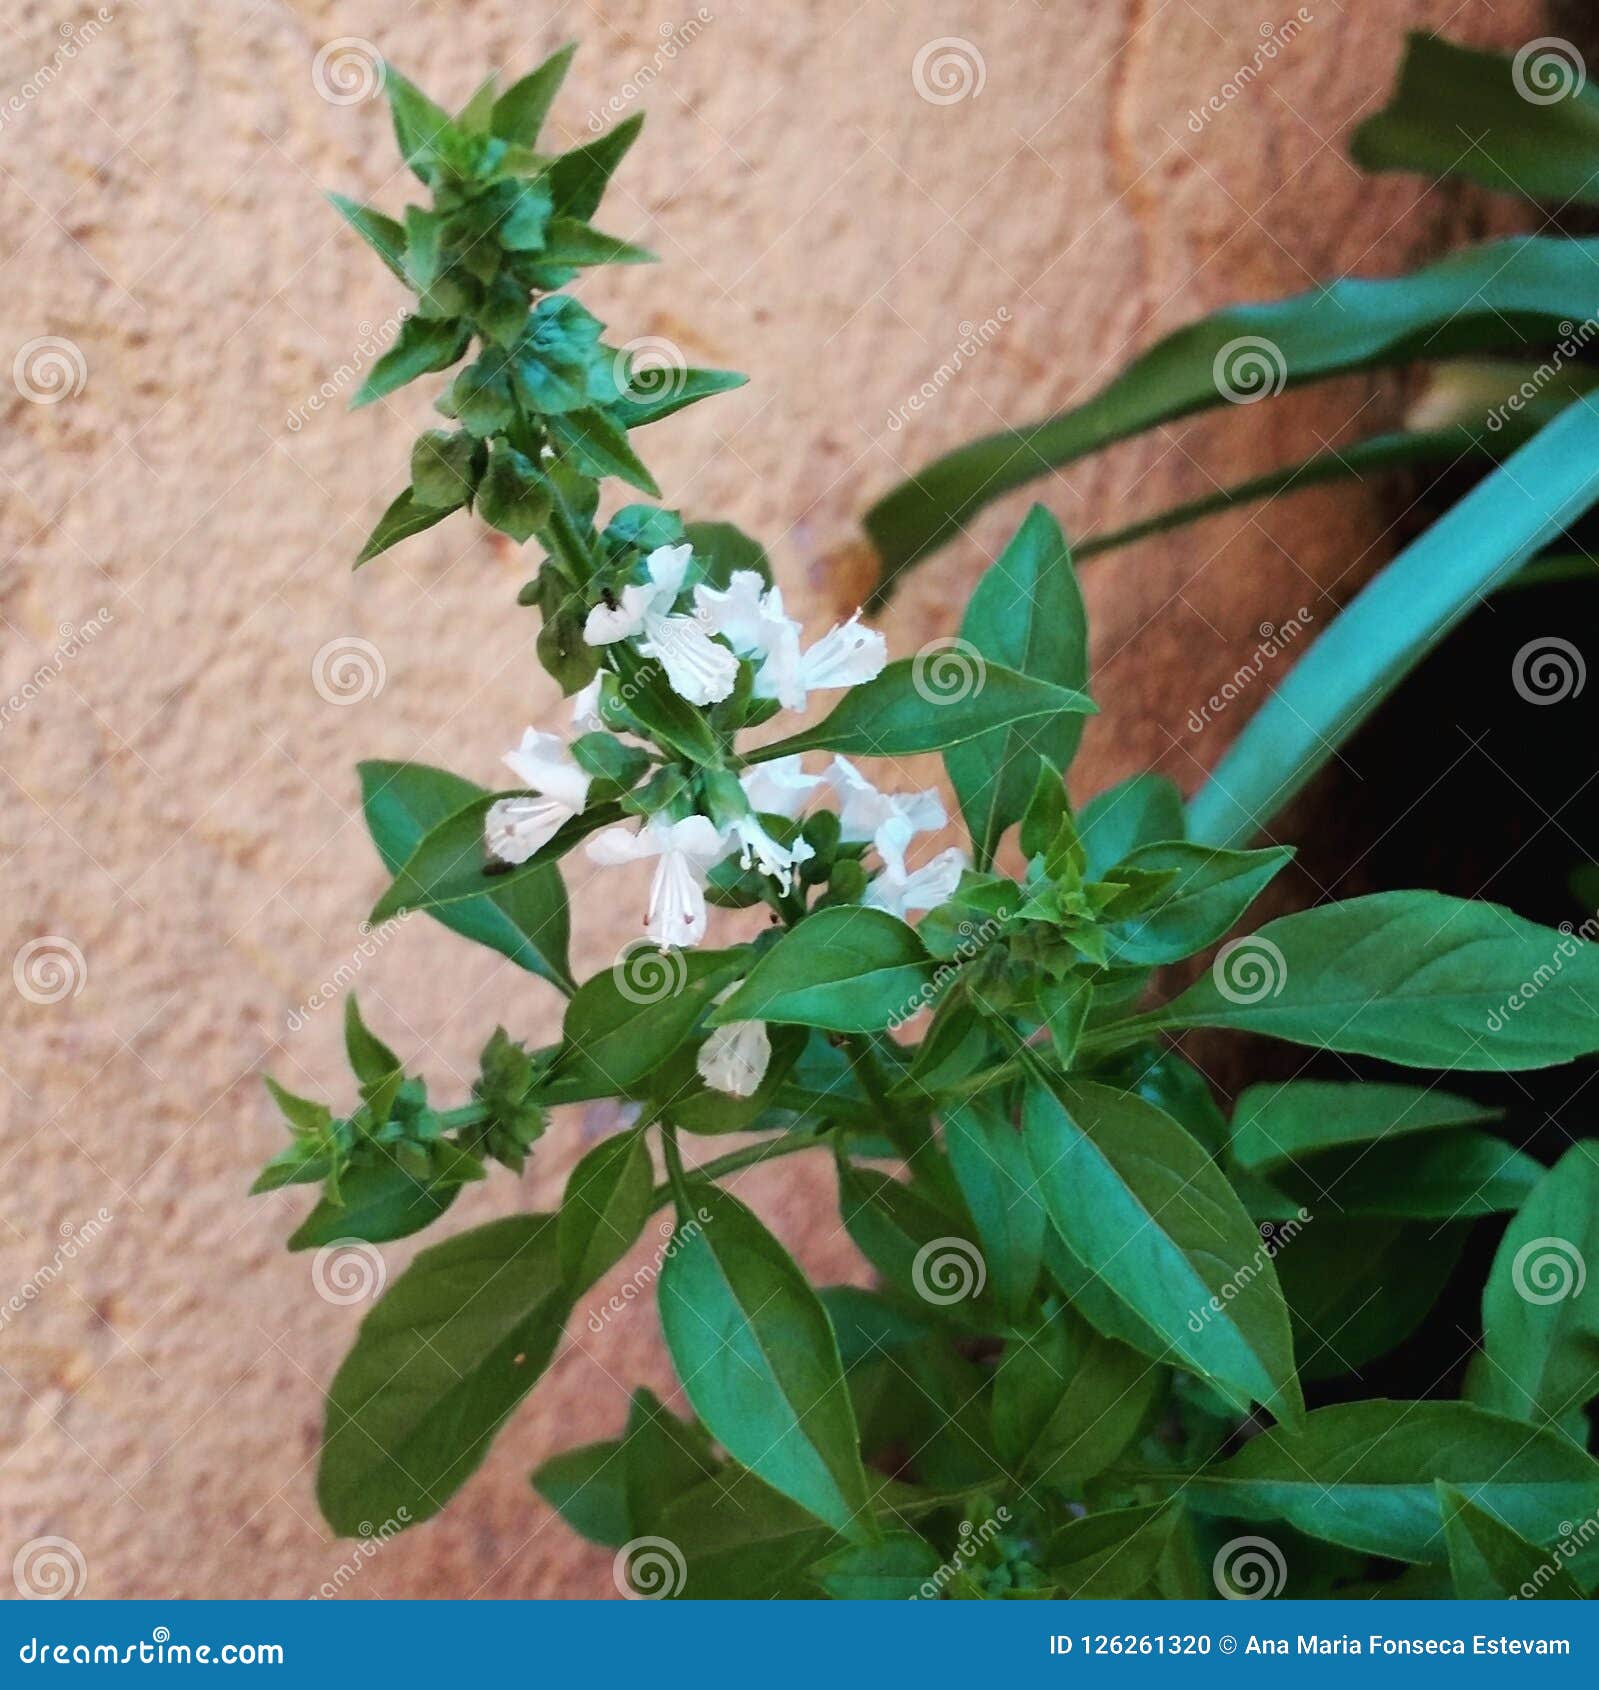 basil with flower